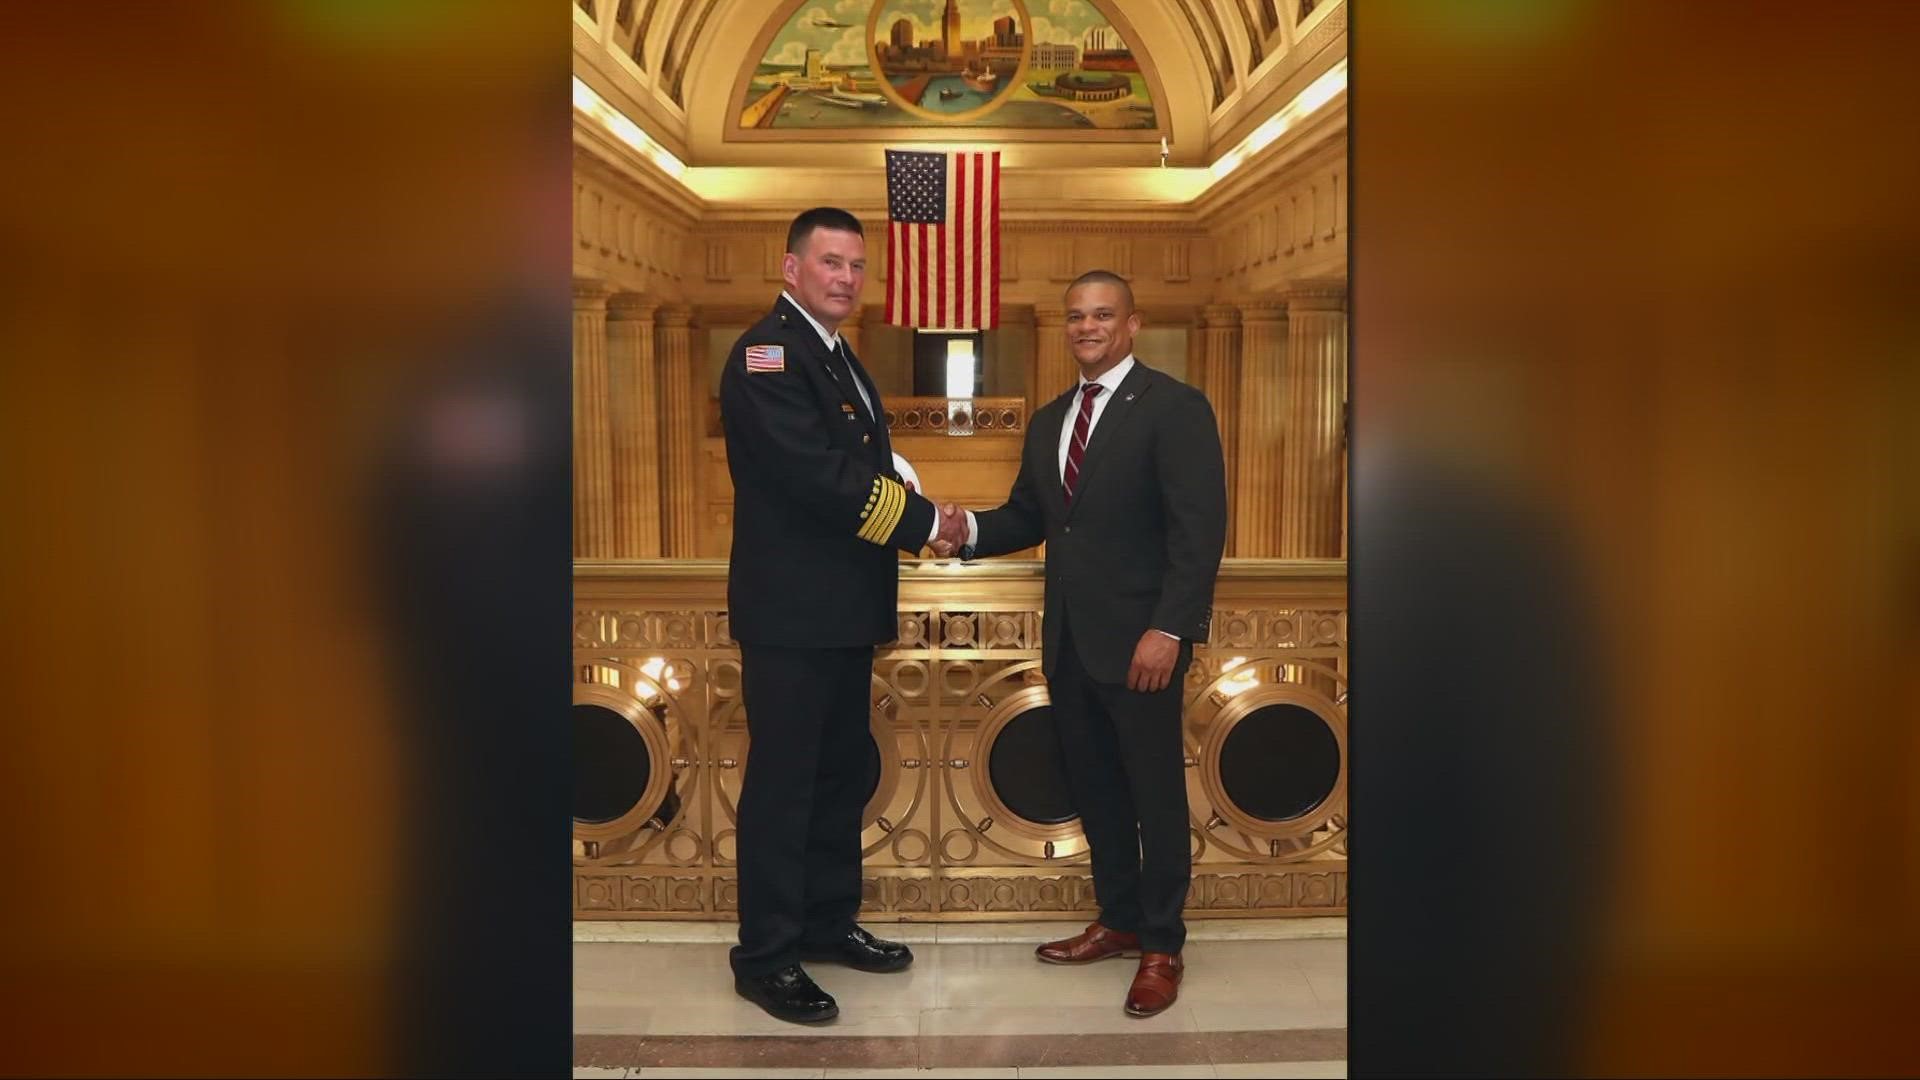 Eric Burchak was sworn in as interim fire chief on Friday. He replaces the retiring Angelo Calvillo.